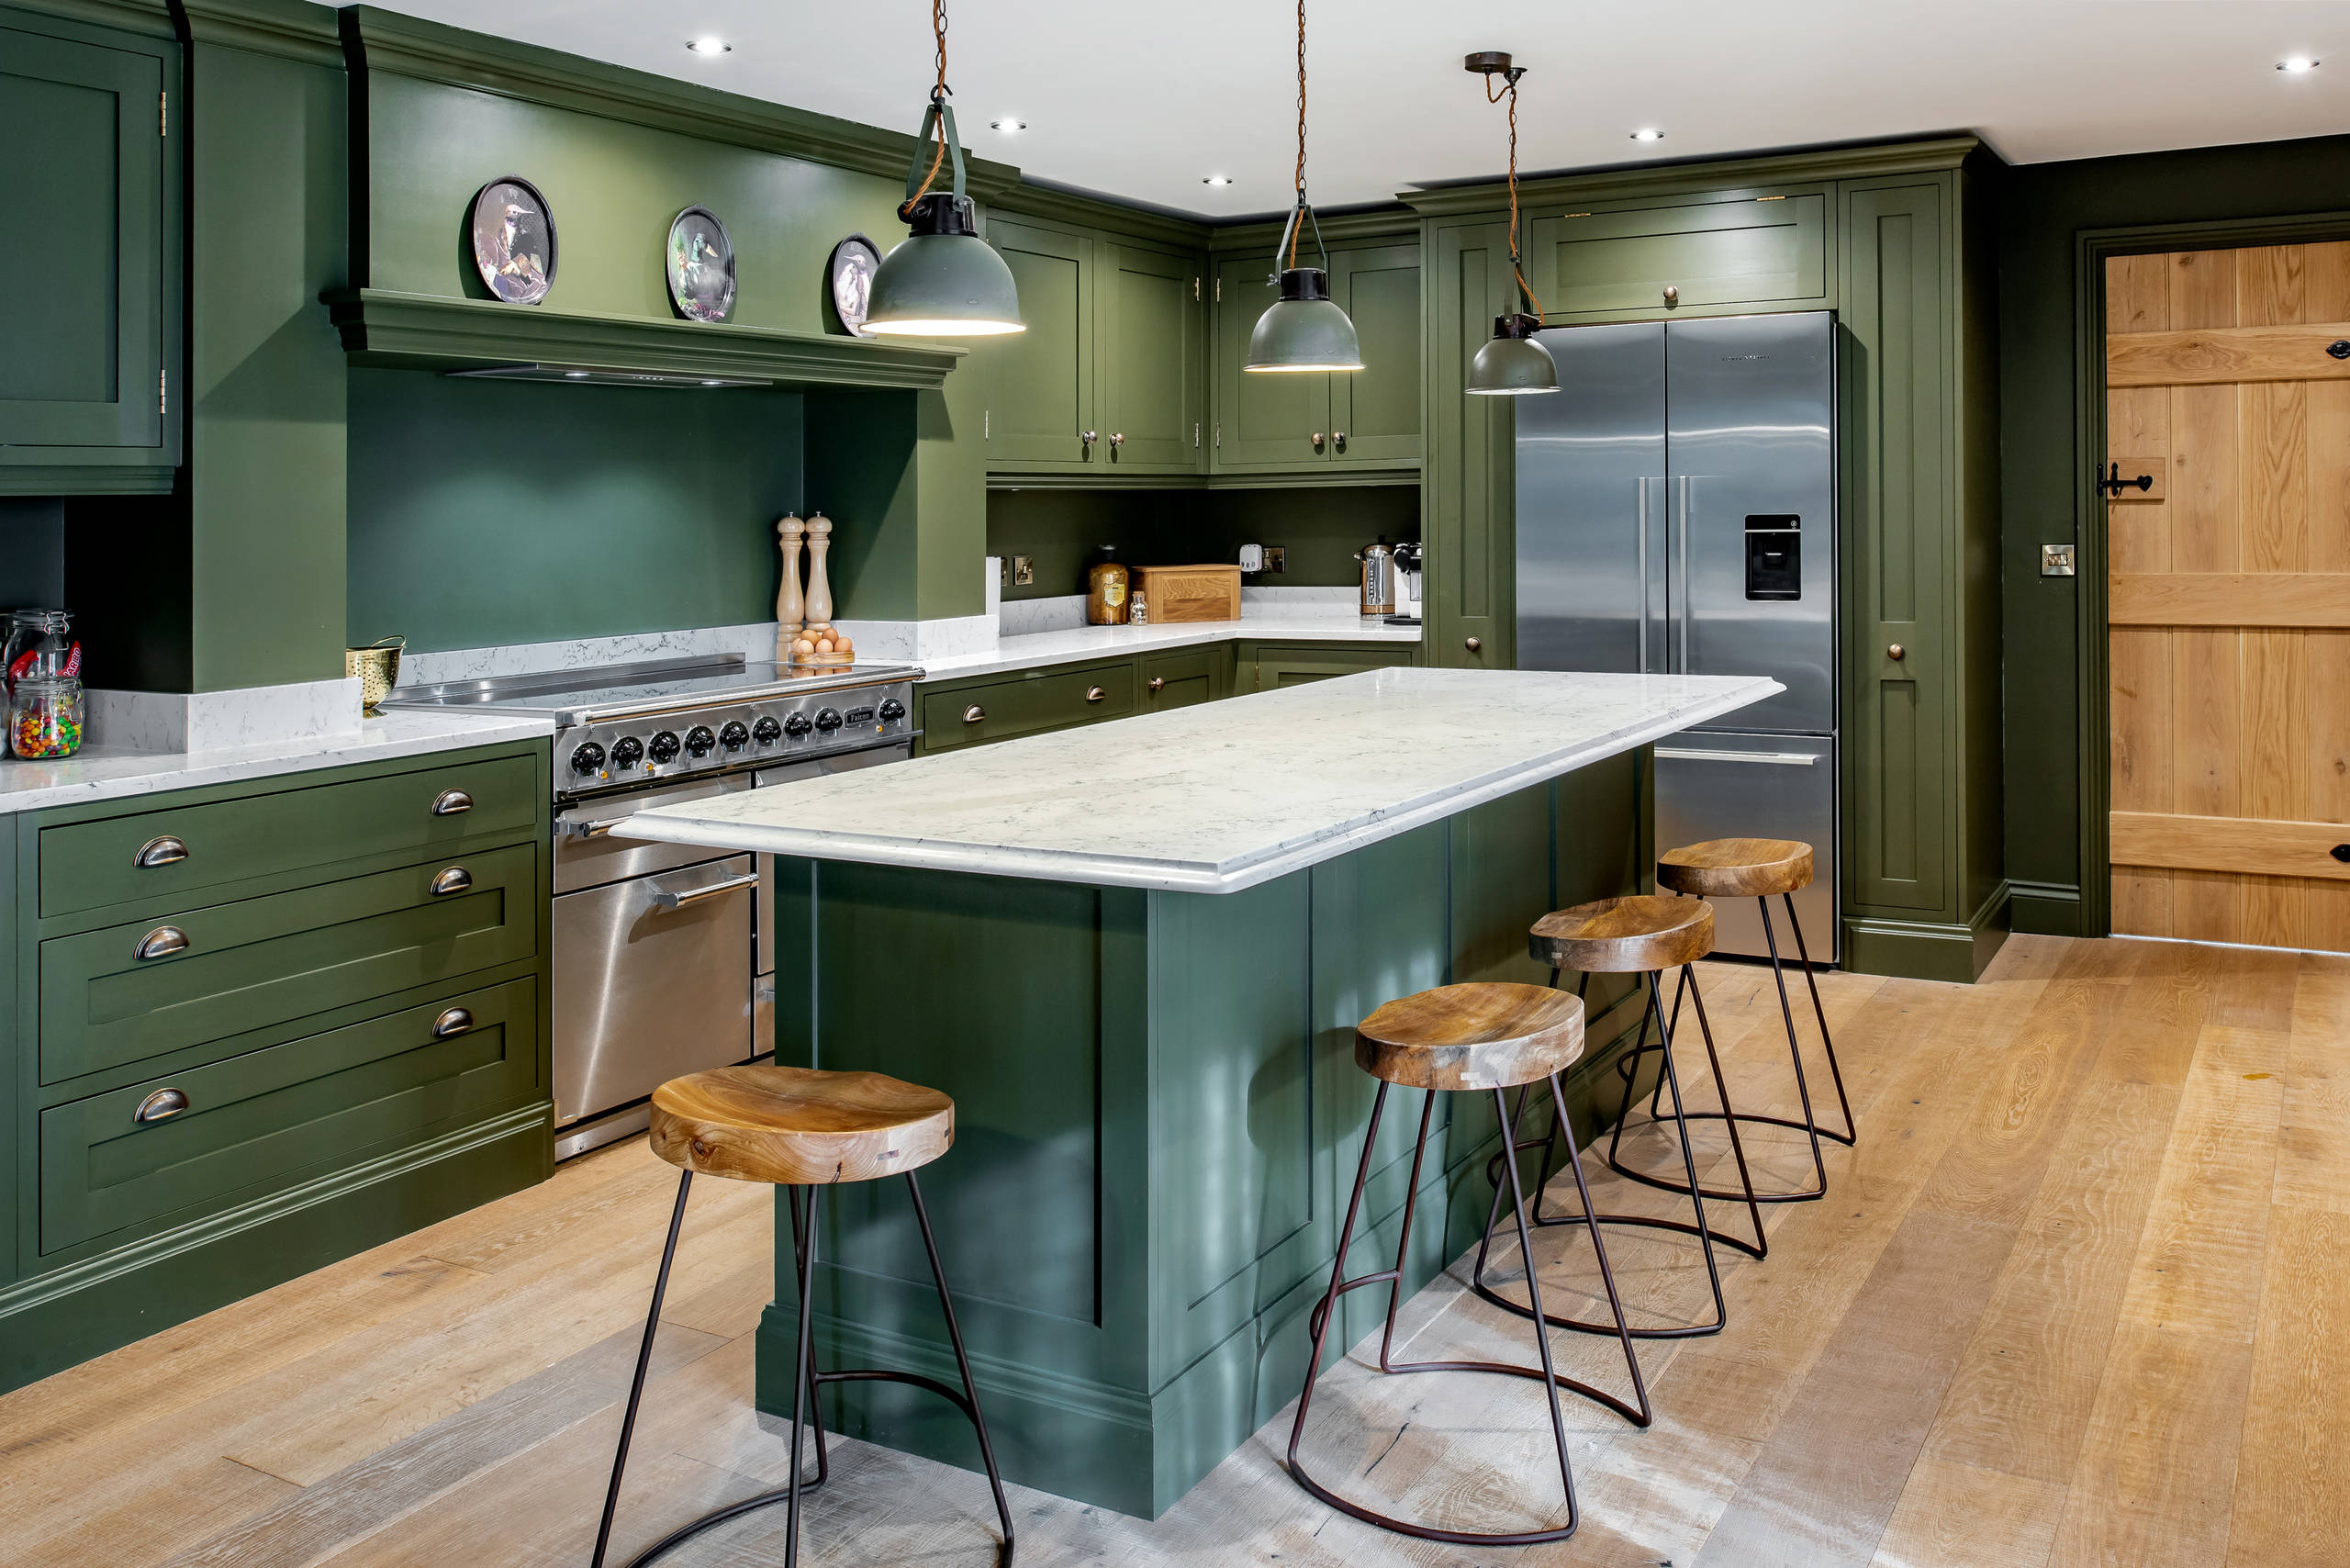 https://st.hzcdn.com/simgs/pictures/kitchens/chic-dark-olive-green-kitchen-shaker-and-may-img~ef81c9360c090056_14-5062-1-22c6b97.jpg